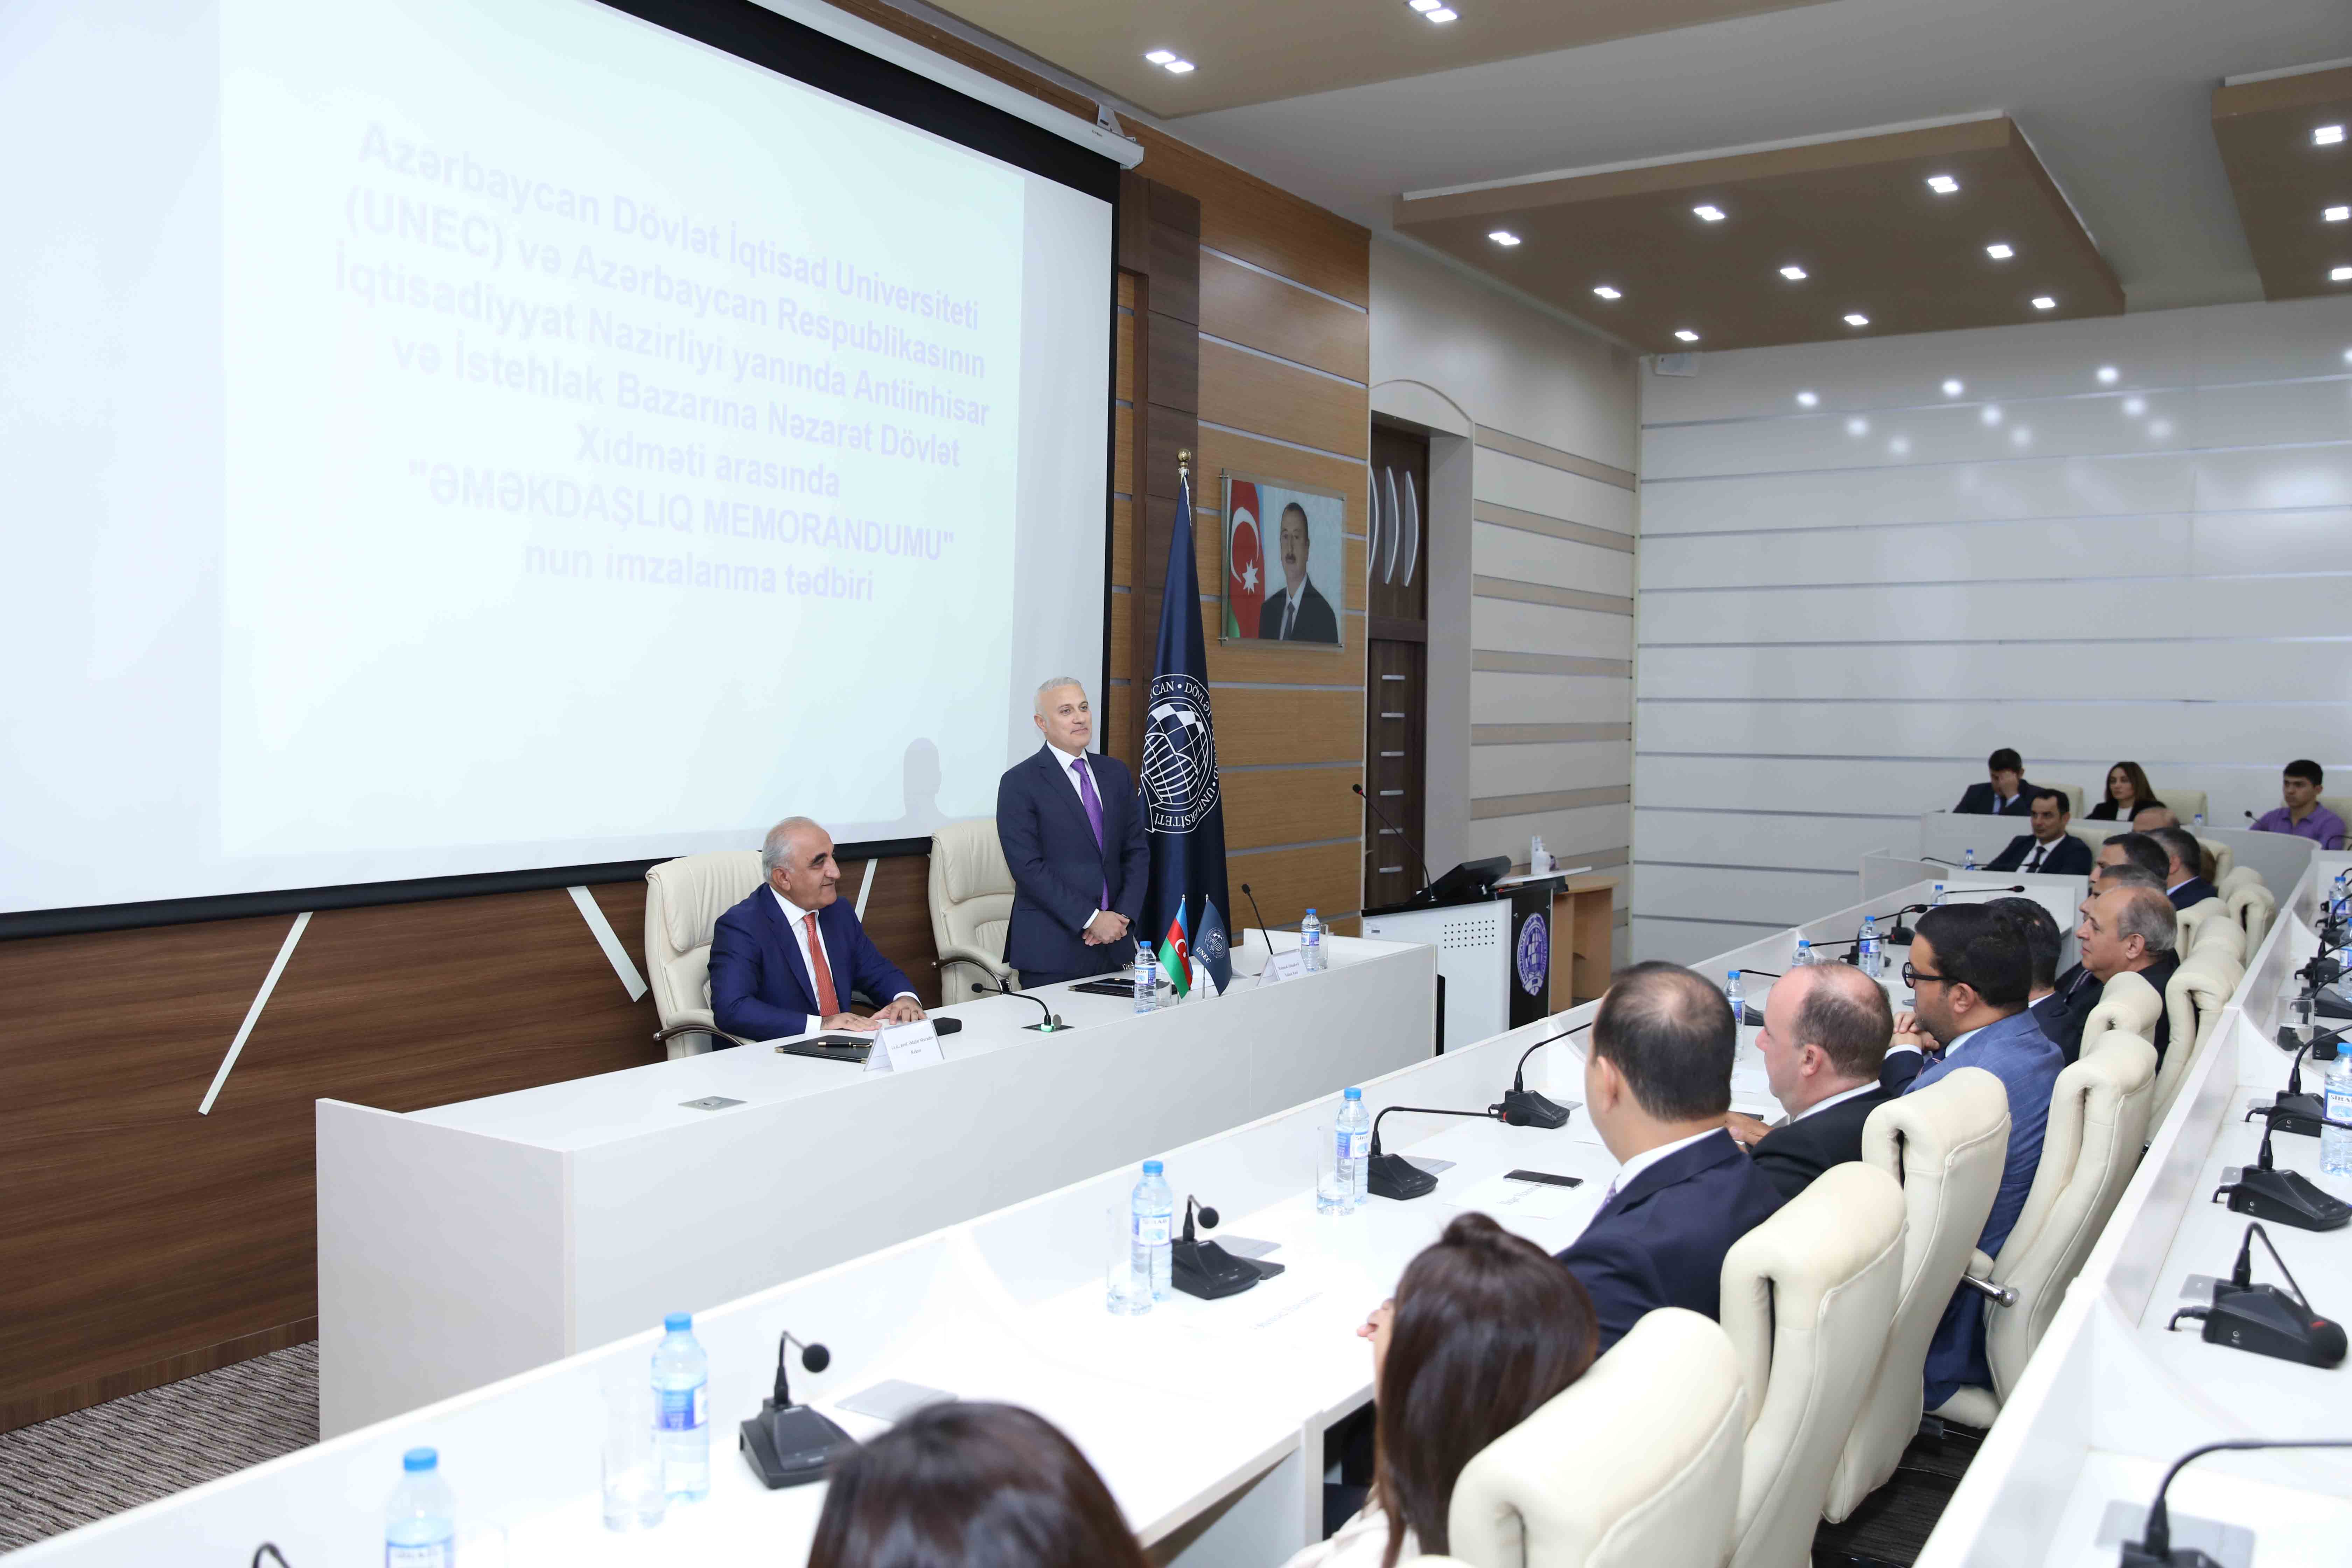 A Memorandum of Cooperation was signed between the State Service Antimonopoly and Consumer Market Control and the Azerbaijan State University of Economics